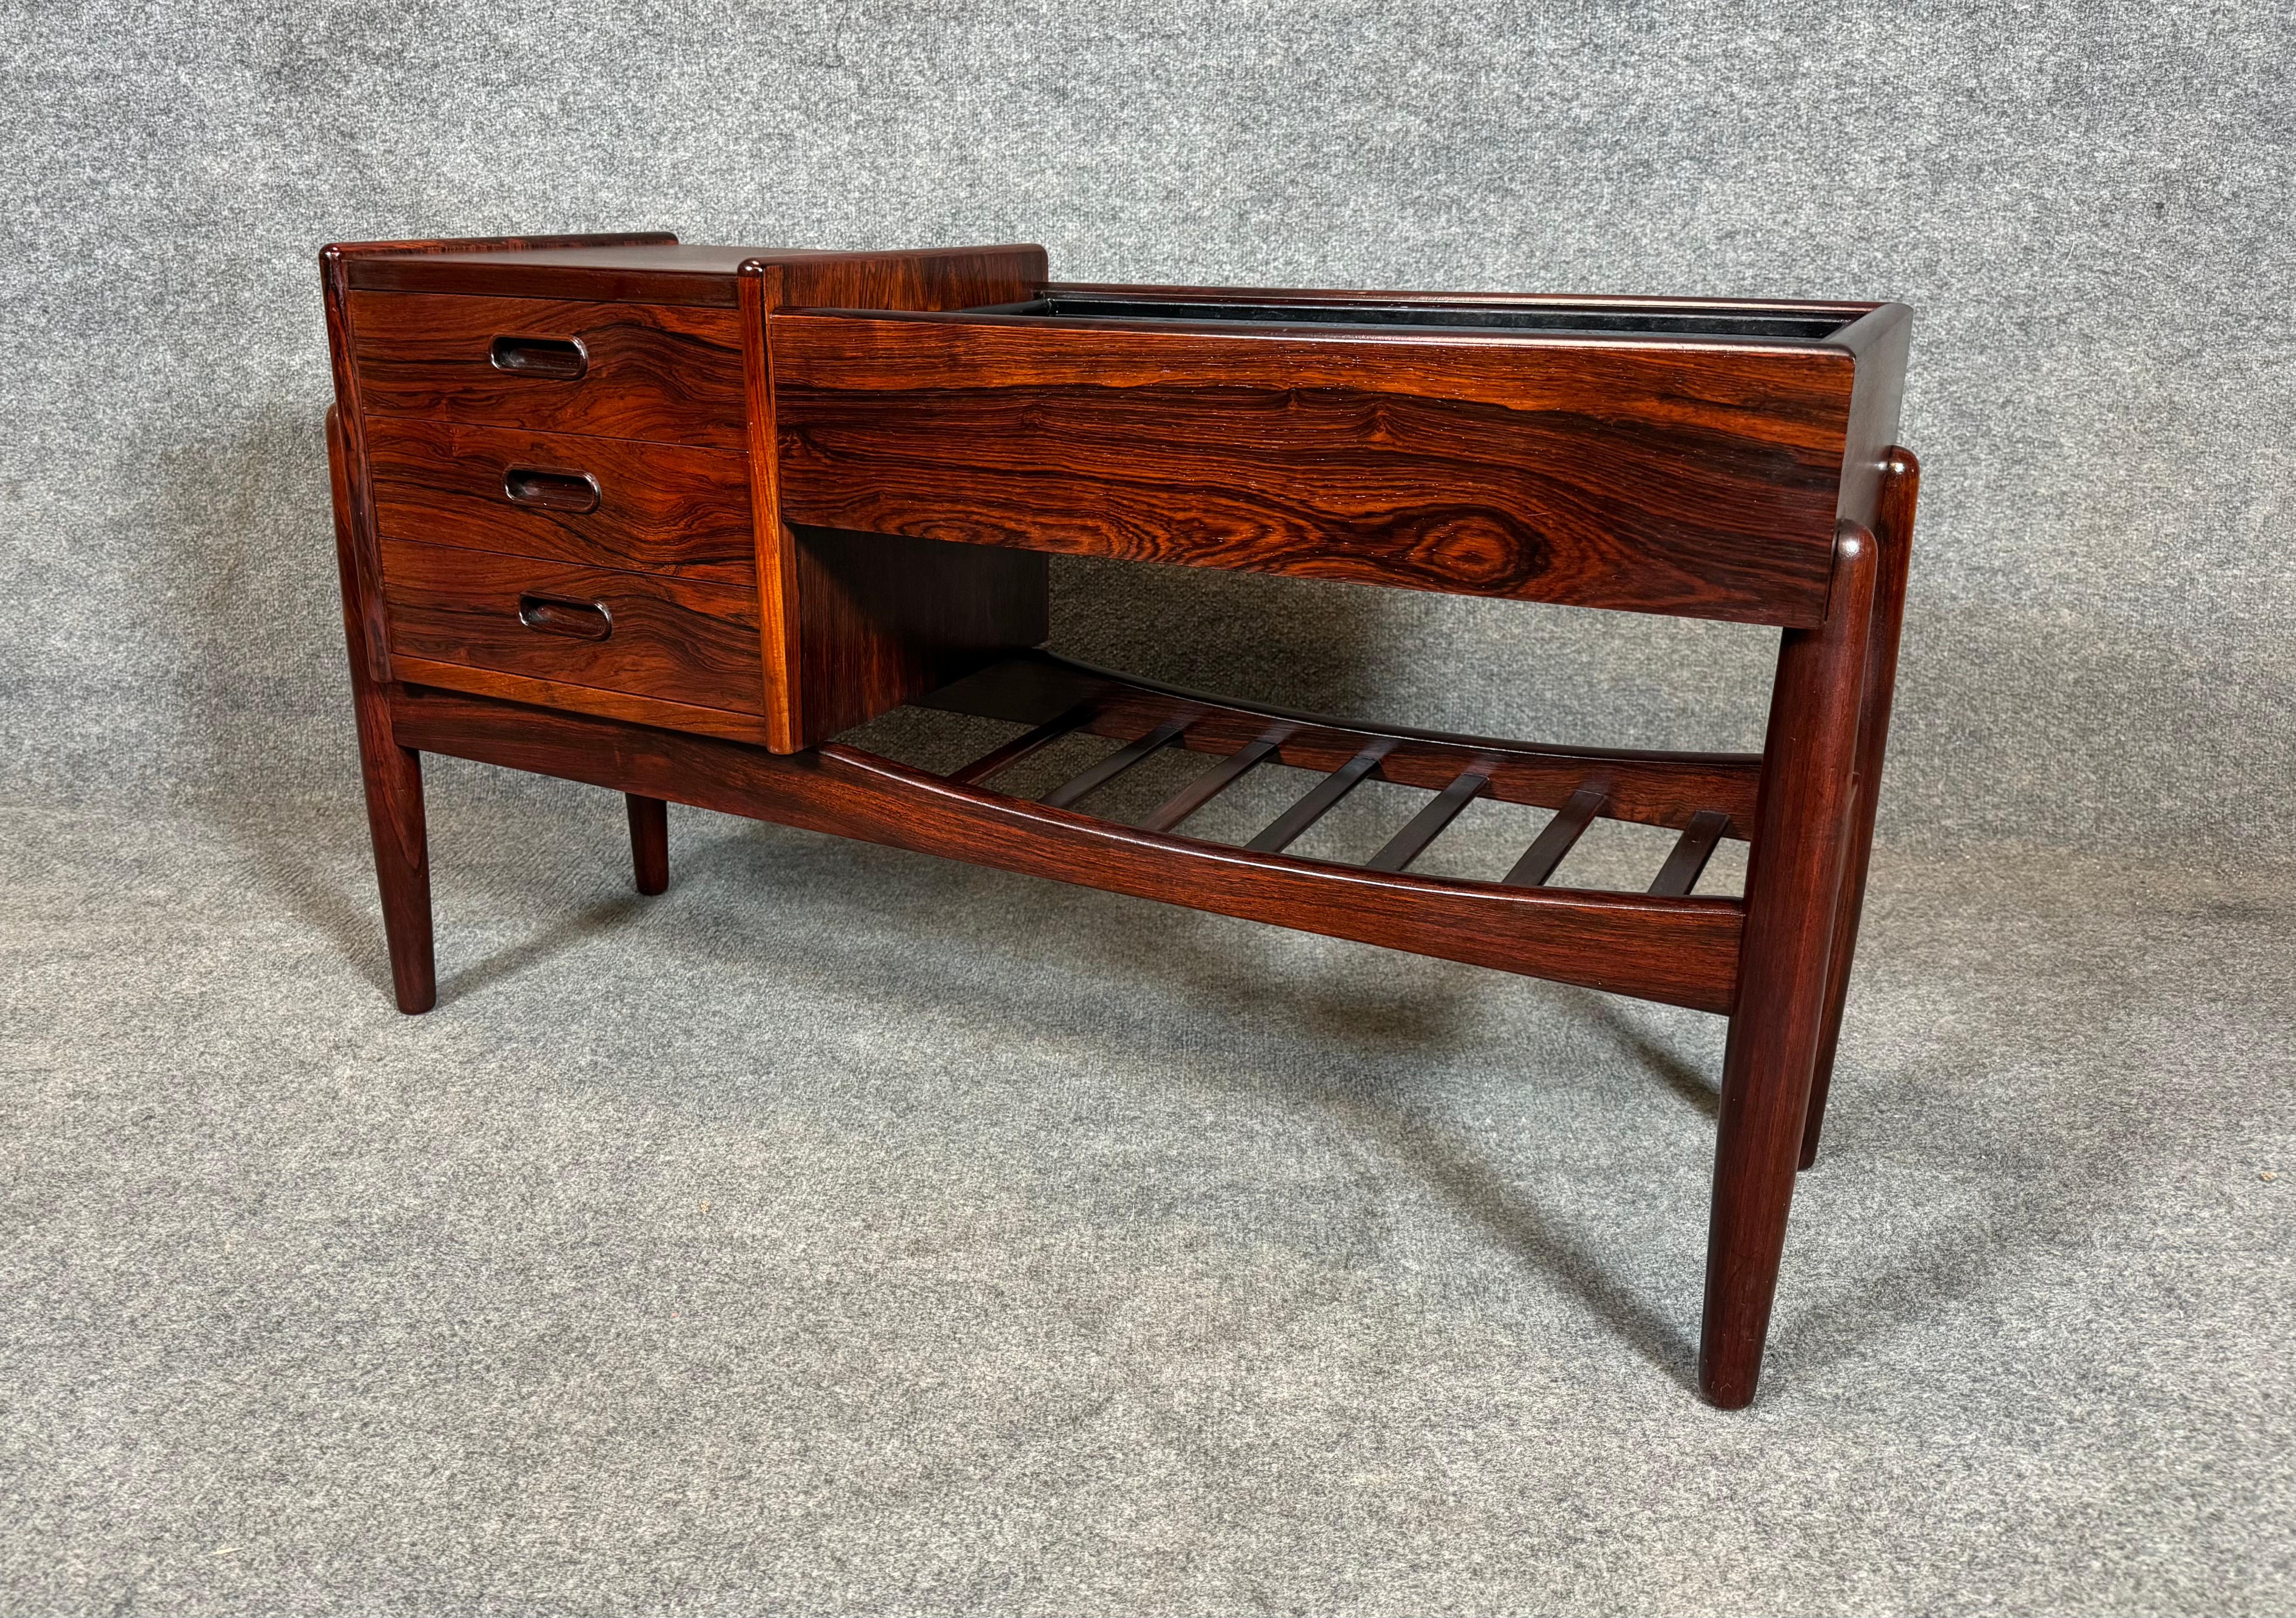 Here is a beautiful scandinavian modern entry chest-planter in rosewood designed by Arne Wahl Iversen and manufactured by Vinde Mobelfabrik in Denmark in the 1960's. This exquisite piece, recently imported from Europe to California before its